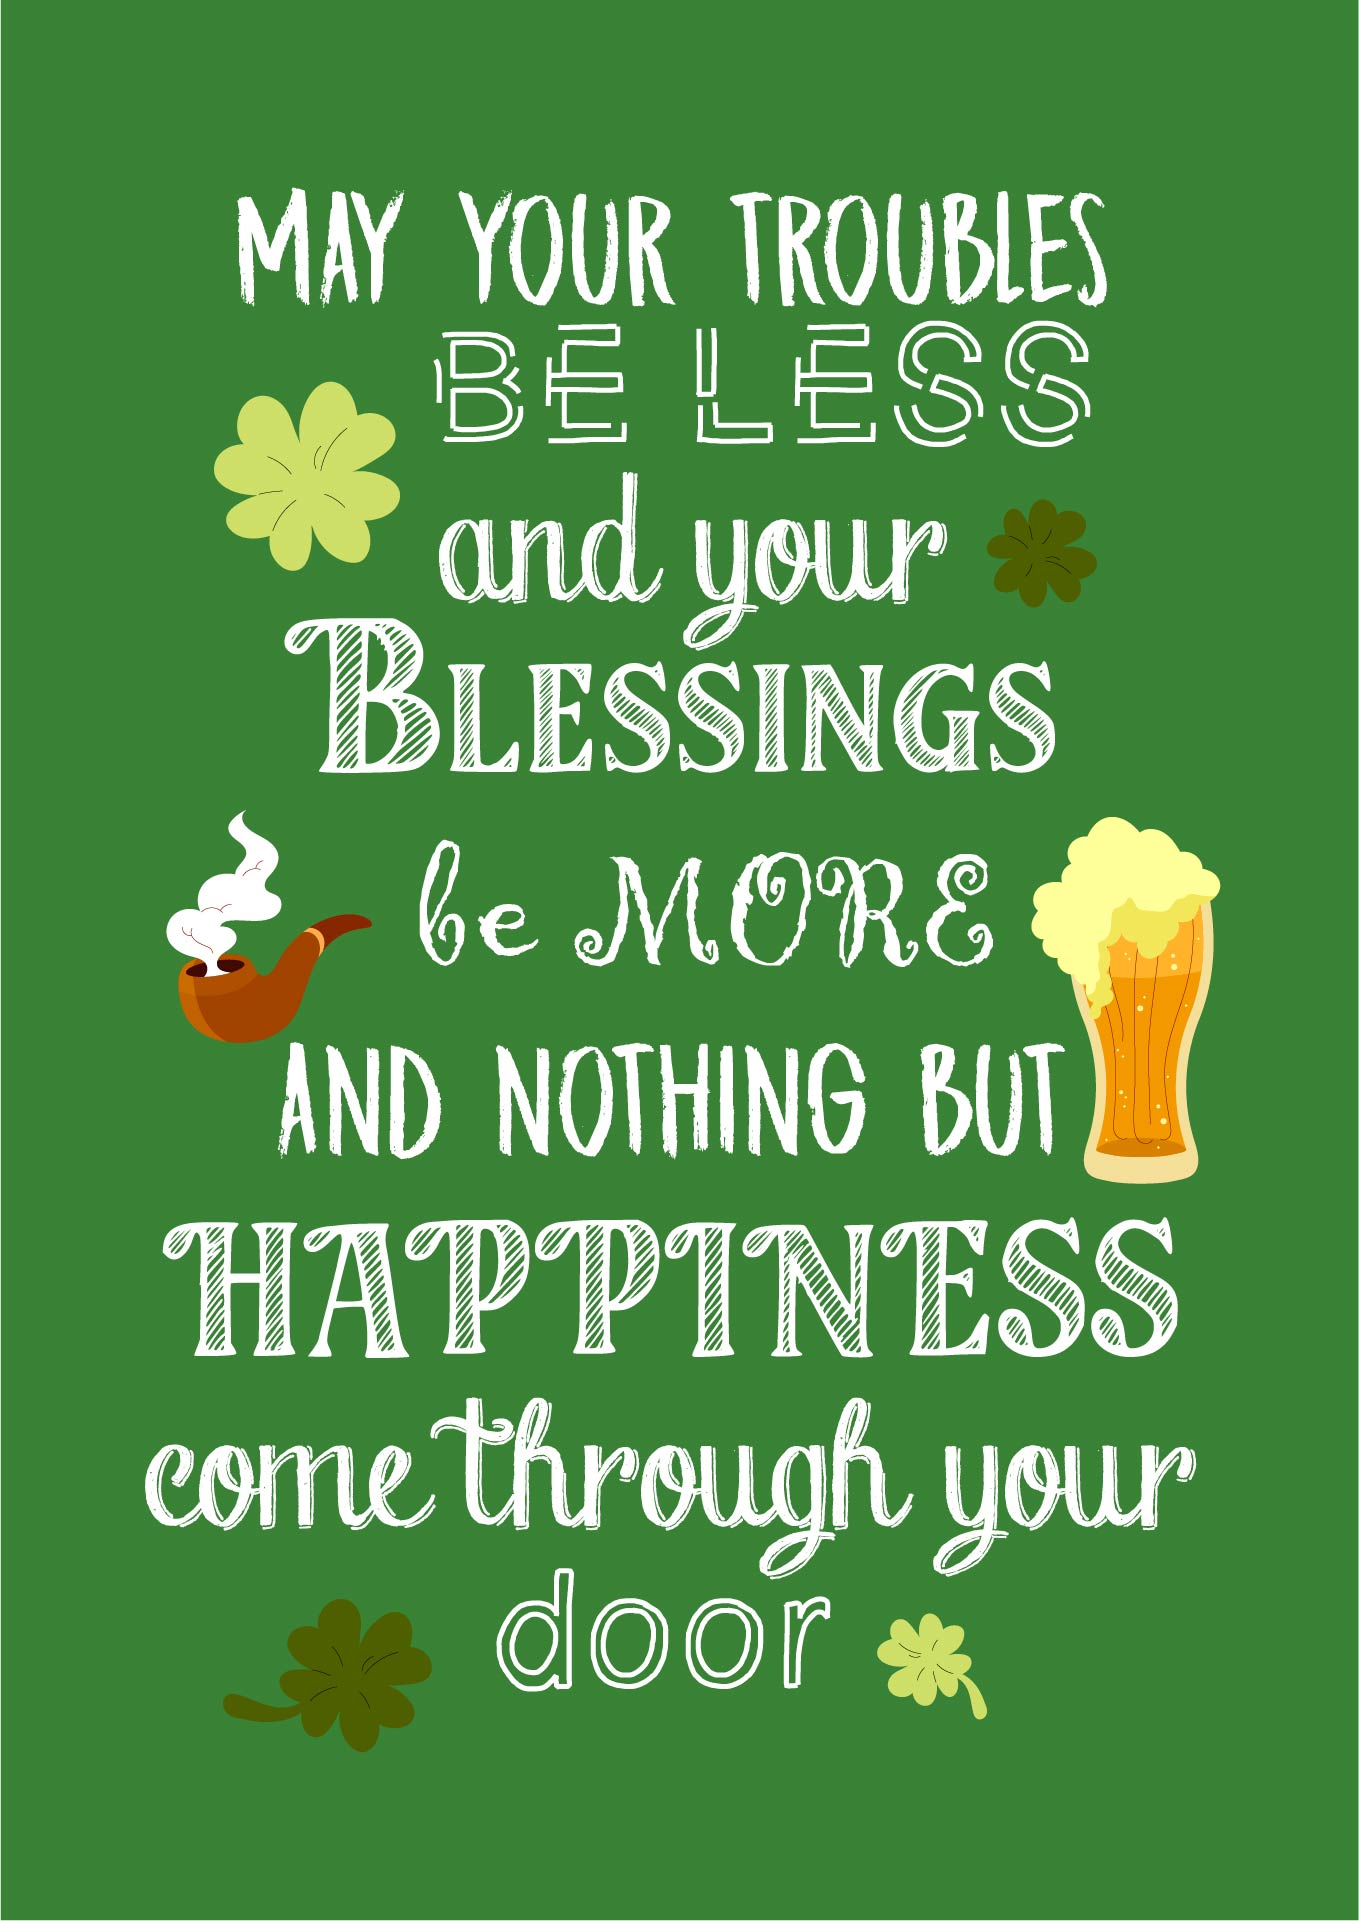 St Patricks Day Quote & Blessings Printable Wall Art